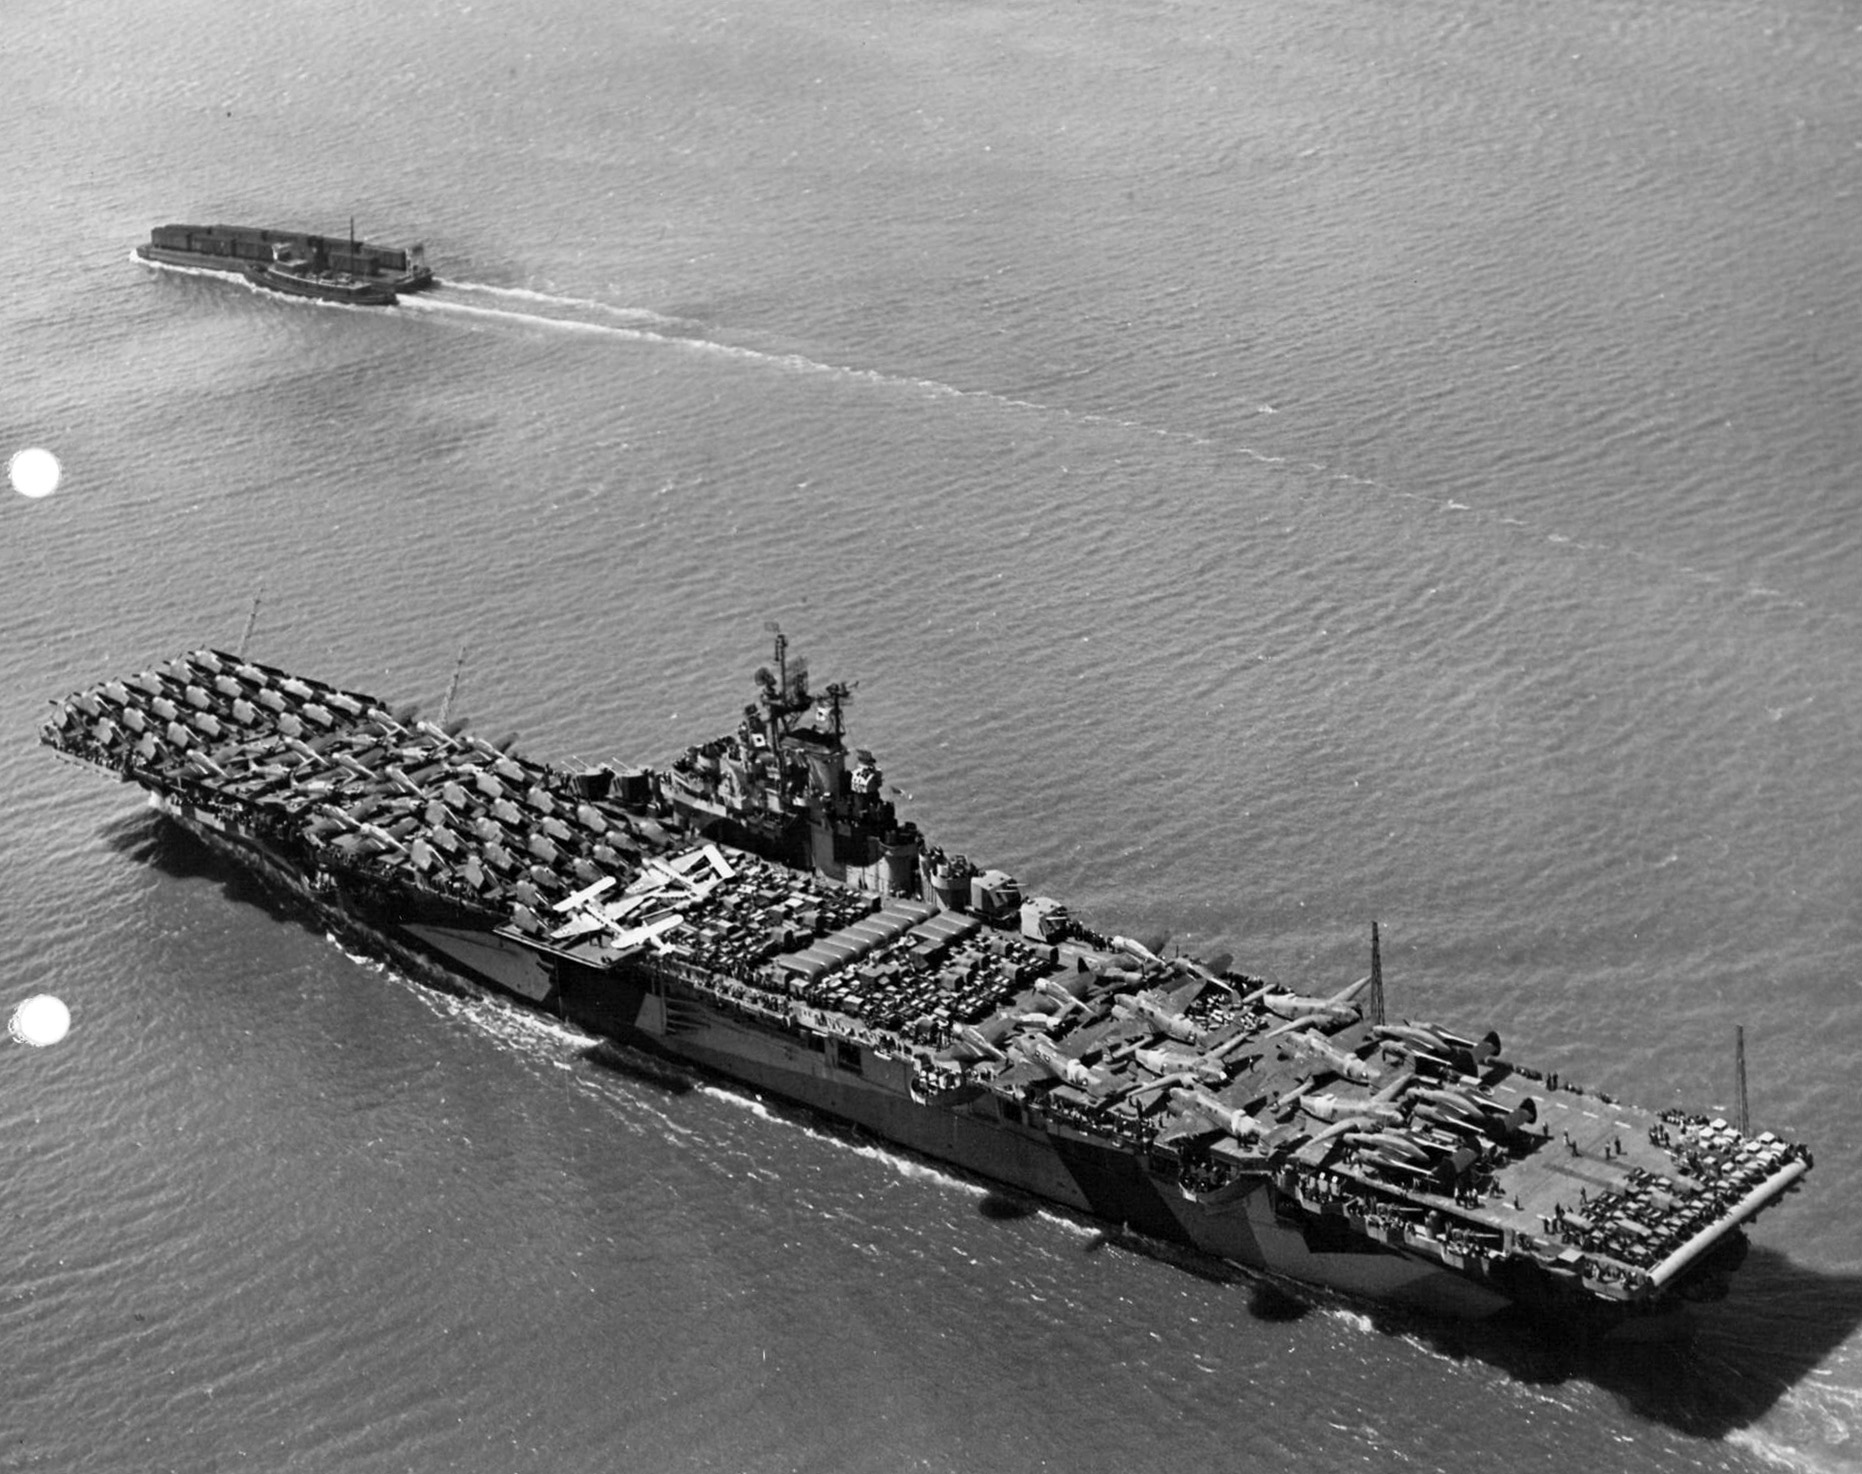 USS Intrepid departing San Francisco, California, 9 Jun 1944 packed with vehicles, equipment, and aircraft including SBD Dauntless, F6F Hellcats, C-45 Expeditors, PV-1 Venturas, and P-61 Black Widows. Photo 2 of 3